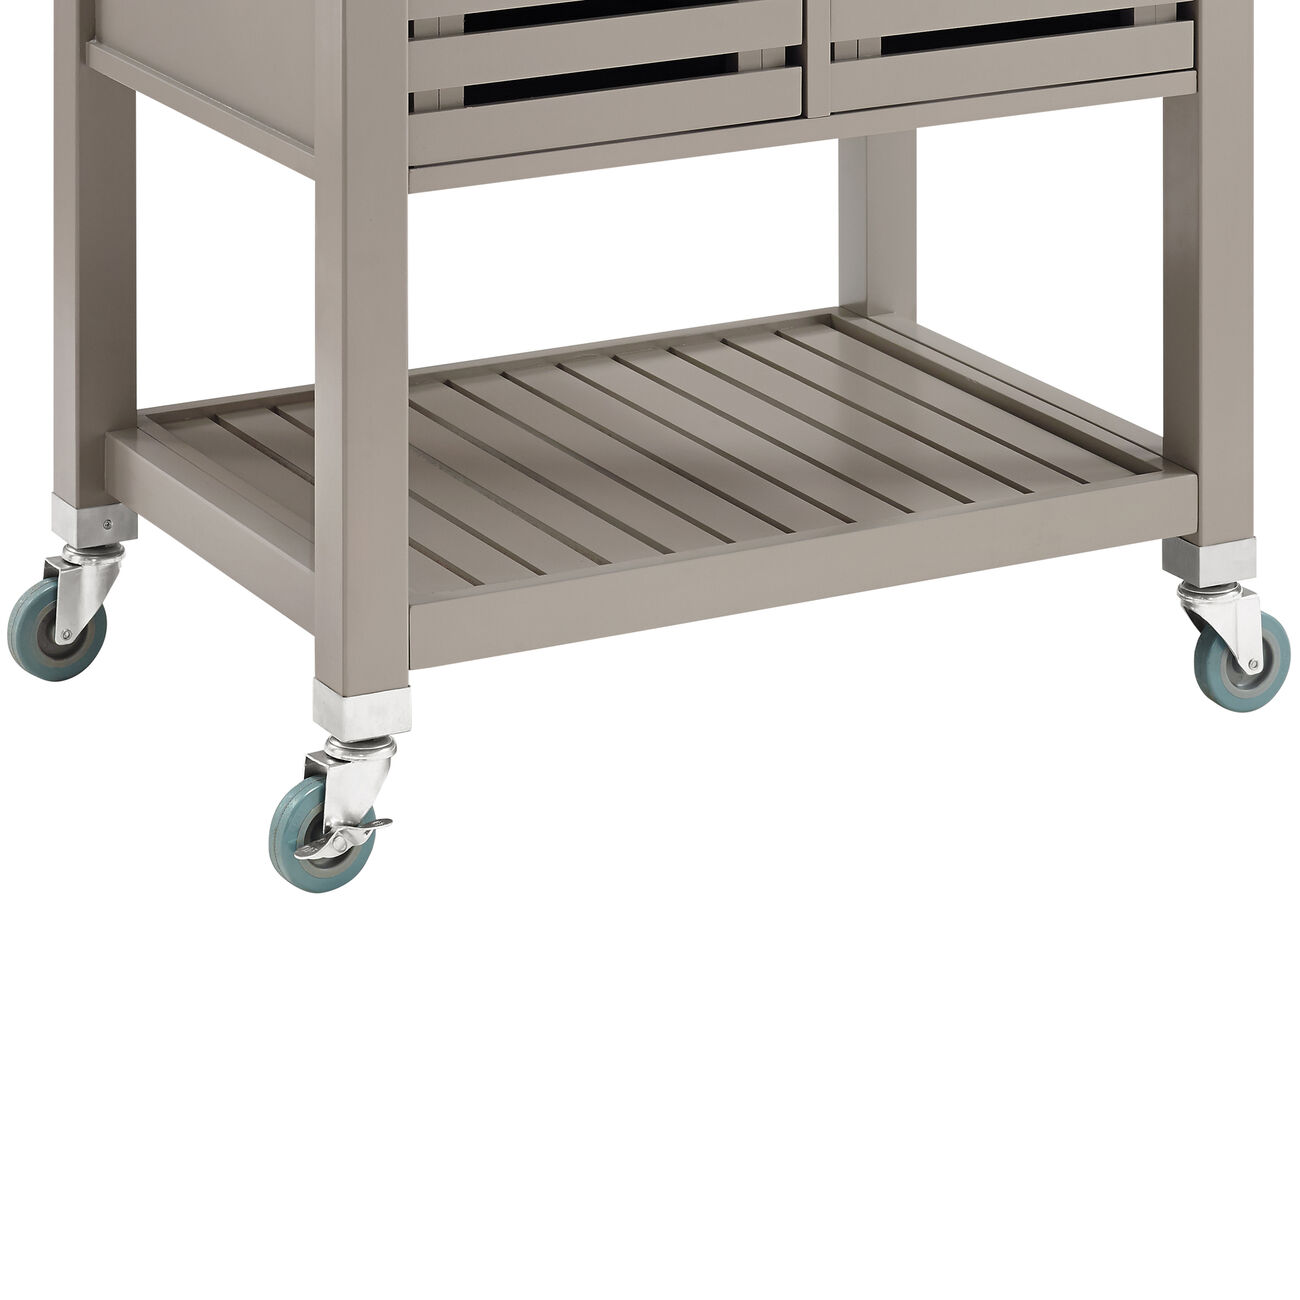 4 Drawer Wooden Kitchen Cart with Caster Wheels, Gray and Silver